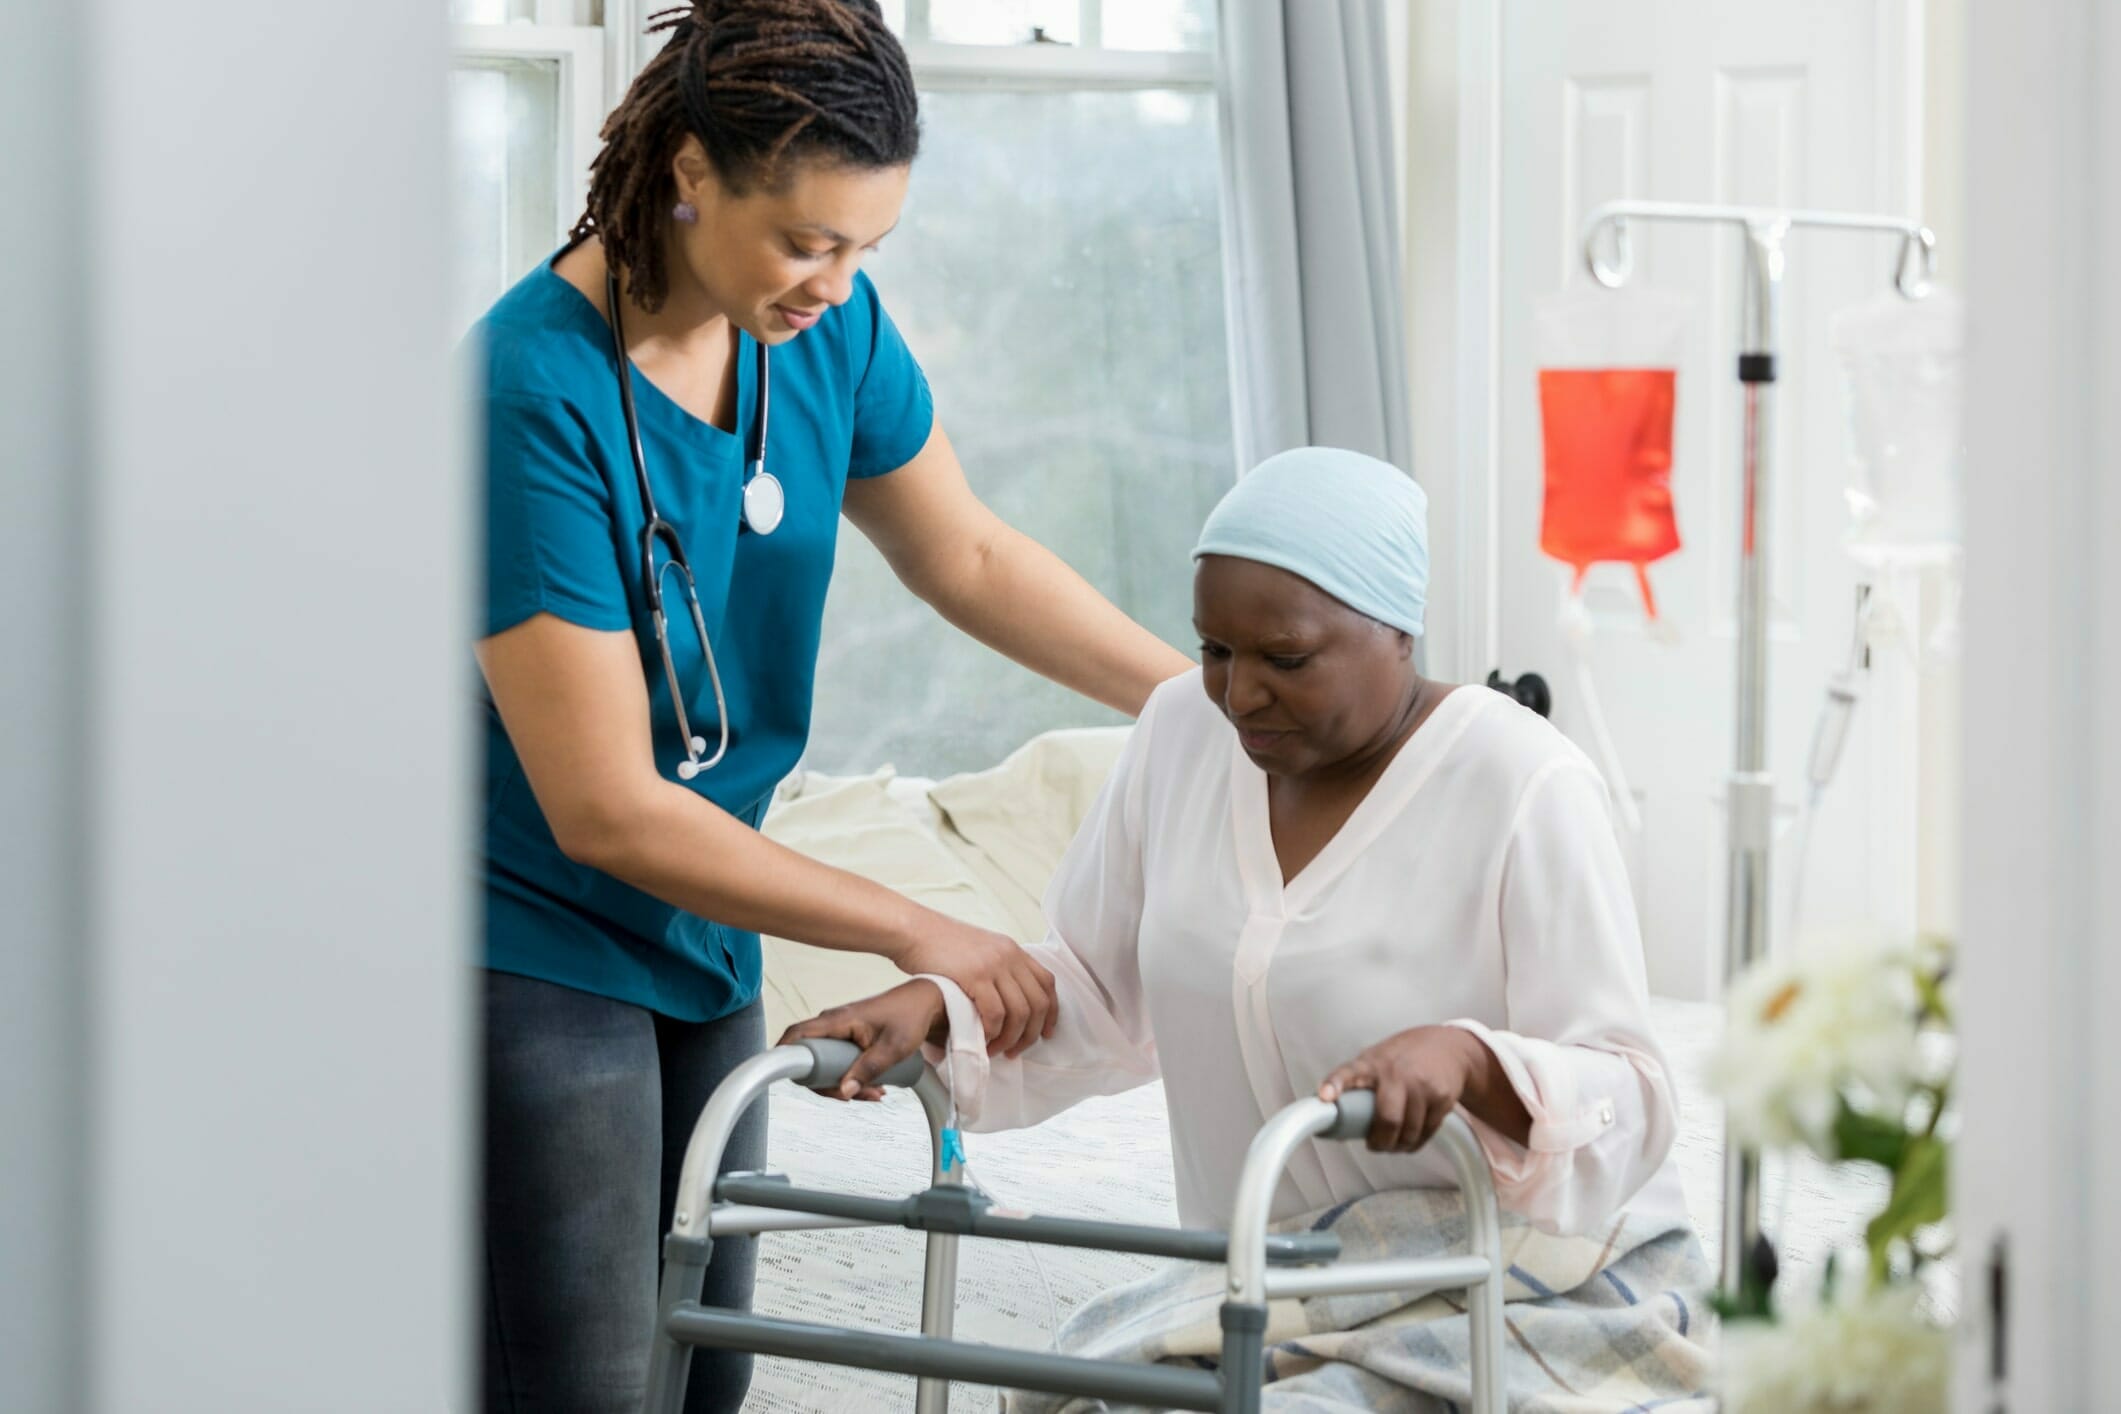 Health care worker helping cancer patient